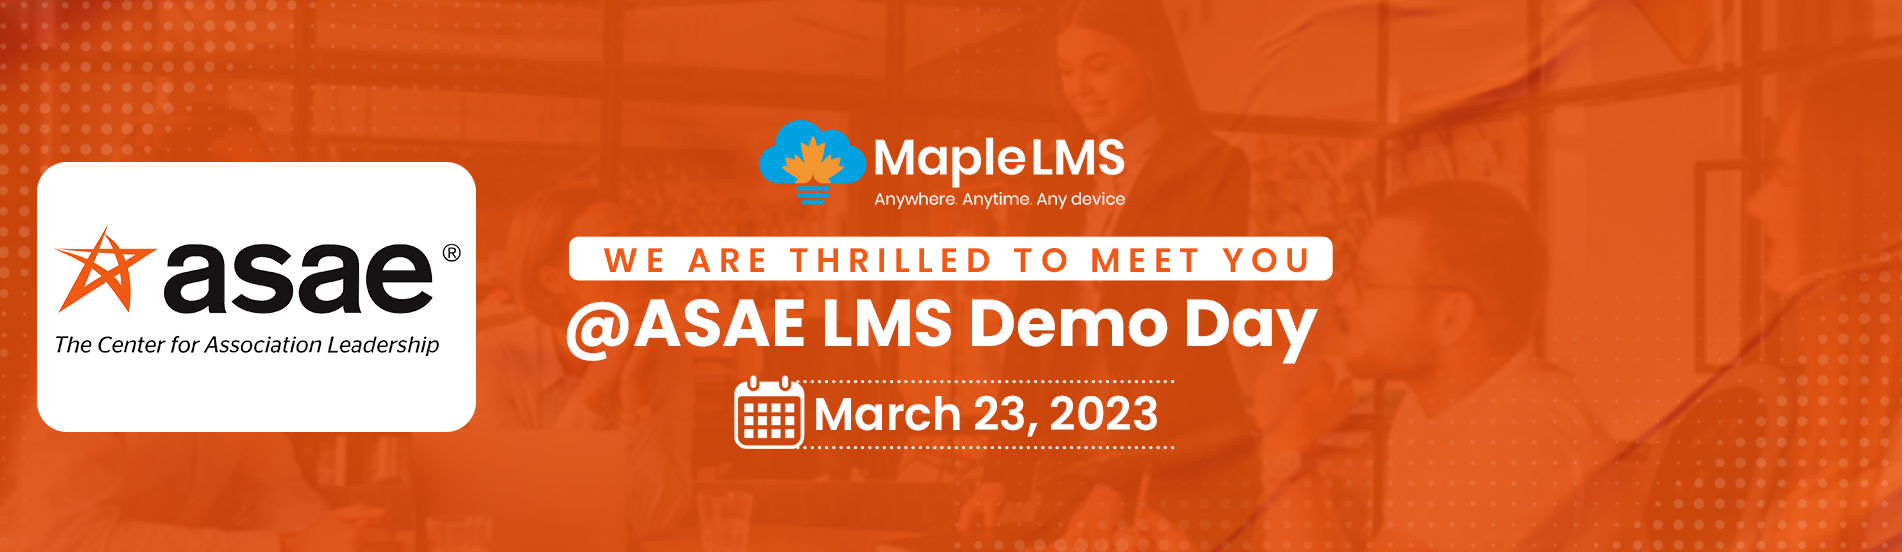 We are Thrilled to Meet You @ASAE LMS Demo Day | March 23, 2023